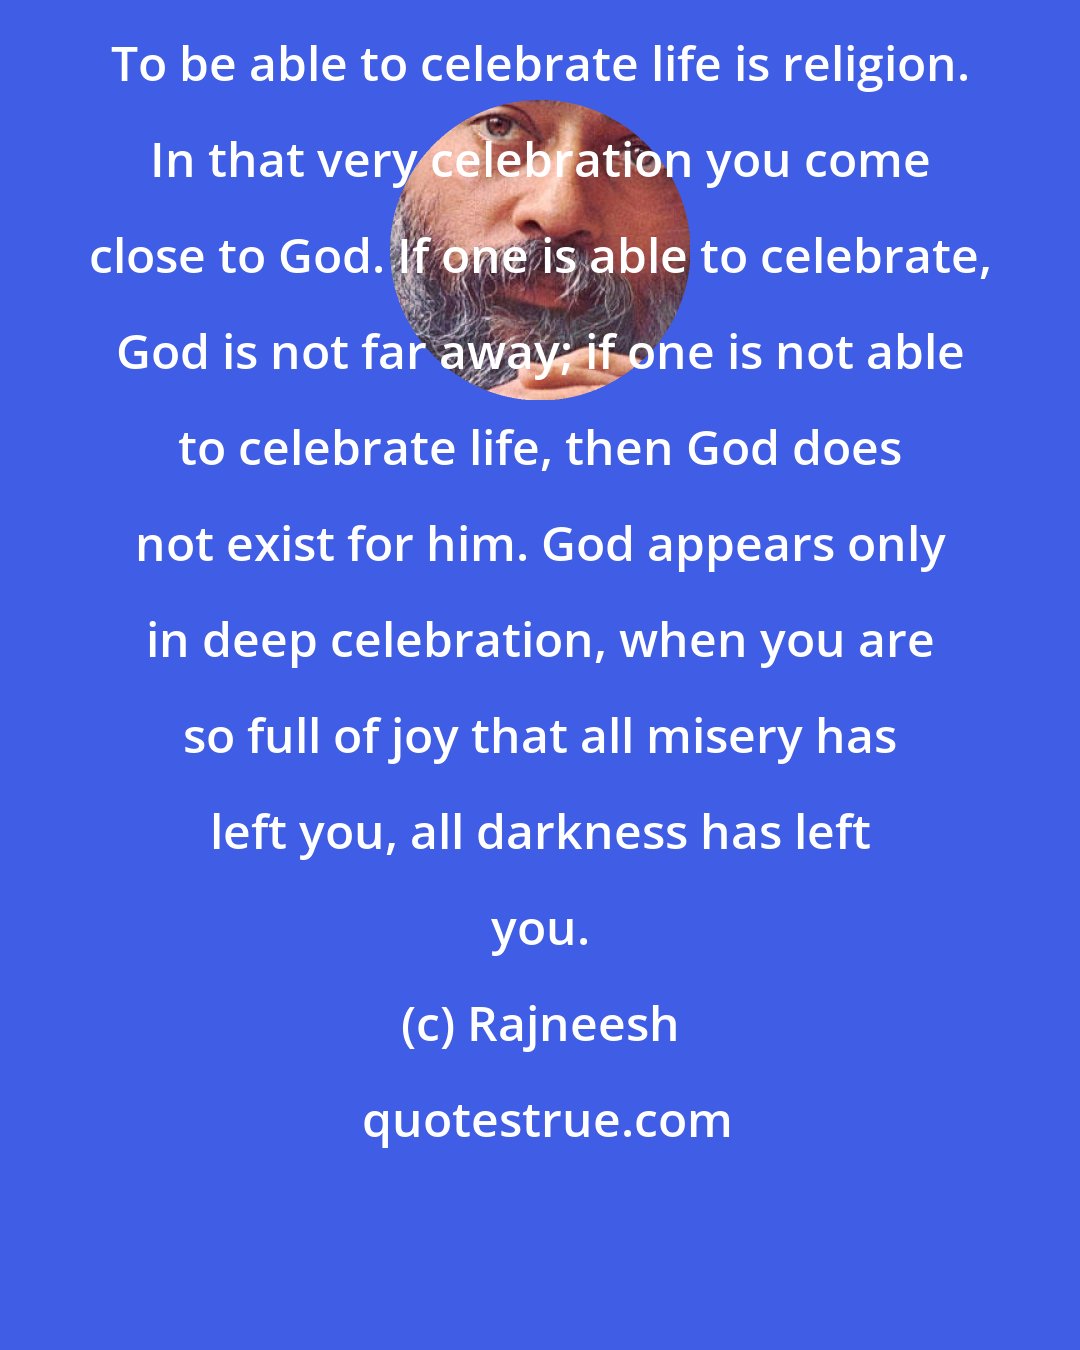 Rajneesh: To be able to celebrate life is religion. In that very celebration you come close to God. If one is able to celebrate, God is not far away; if one is not able to celebrate life, then God does not exist for him. God appears only in deep celebration, when you are so full of joy that all misery has left you, all darkness has left you.